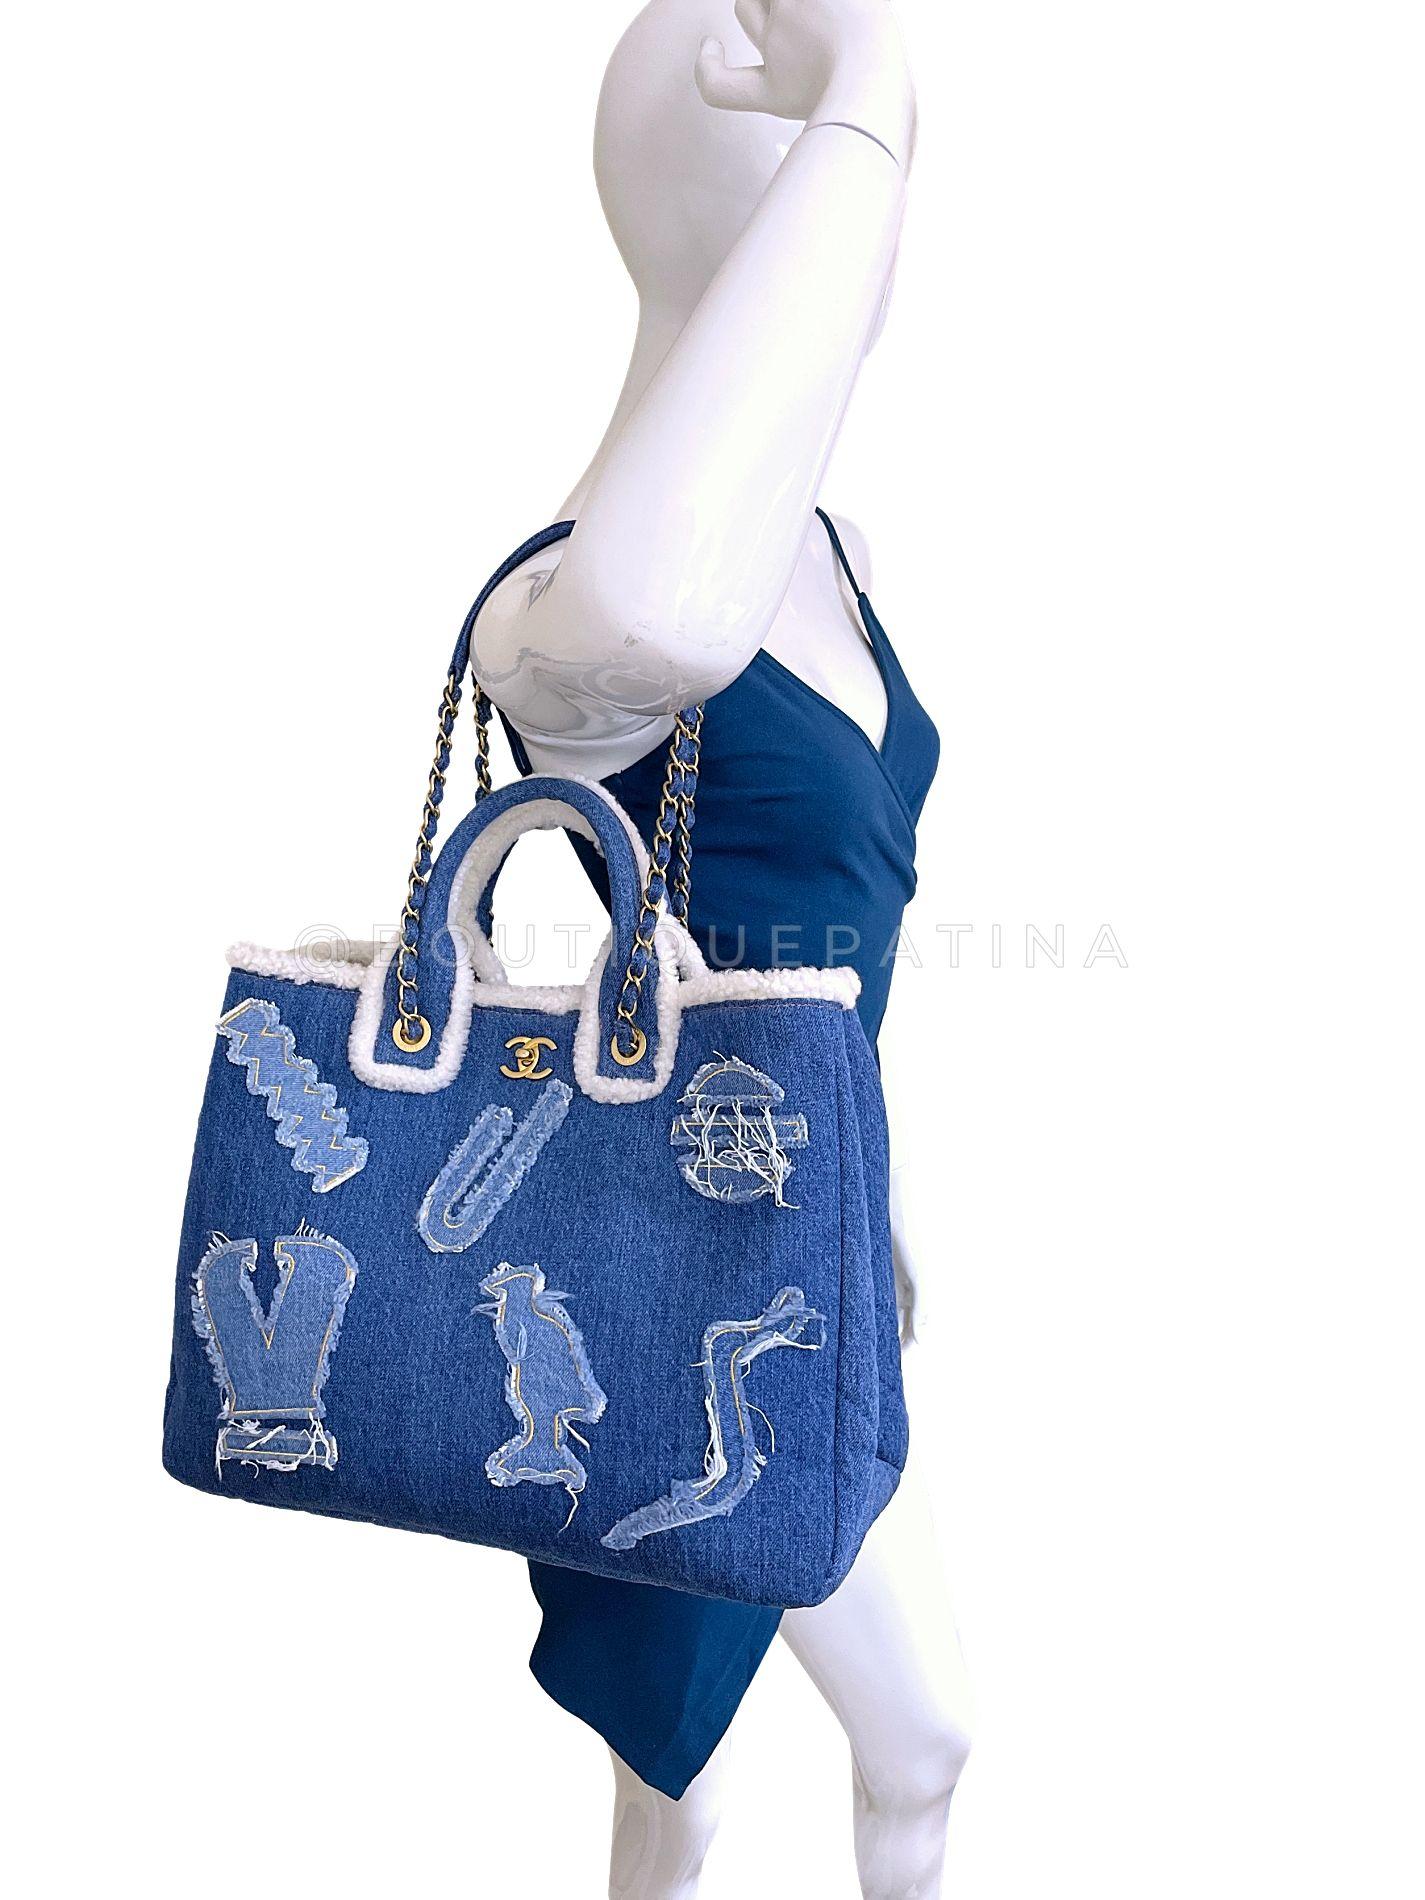 Chanel 19A Egyptian Denim Shearling Convertible Tote Bag Paris-NY GHW 68046 For Sale 9